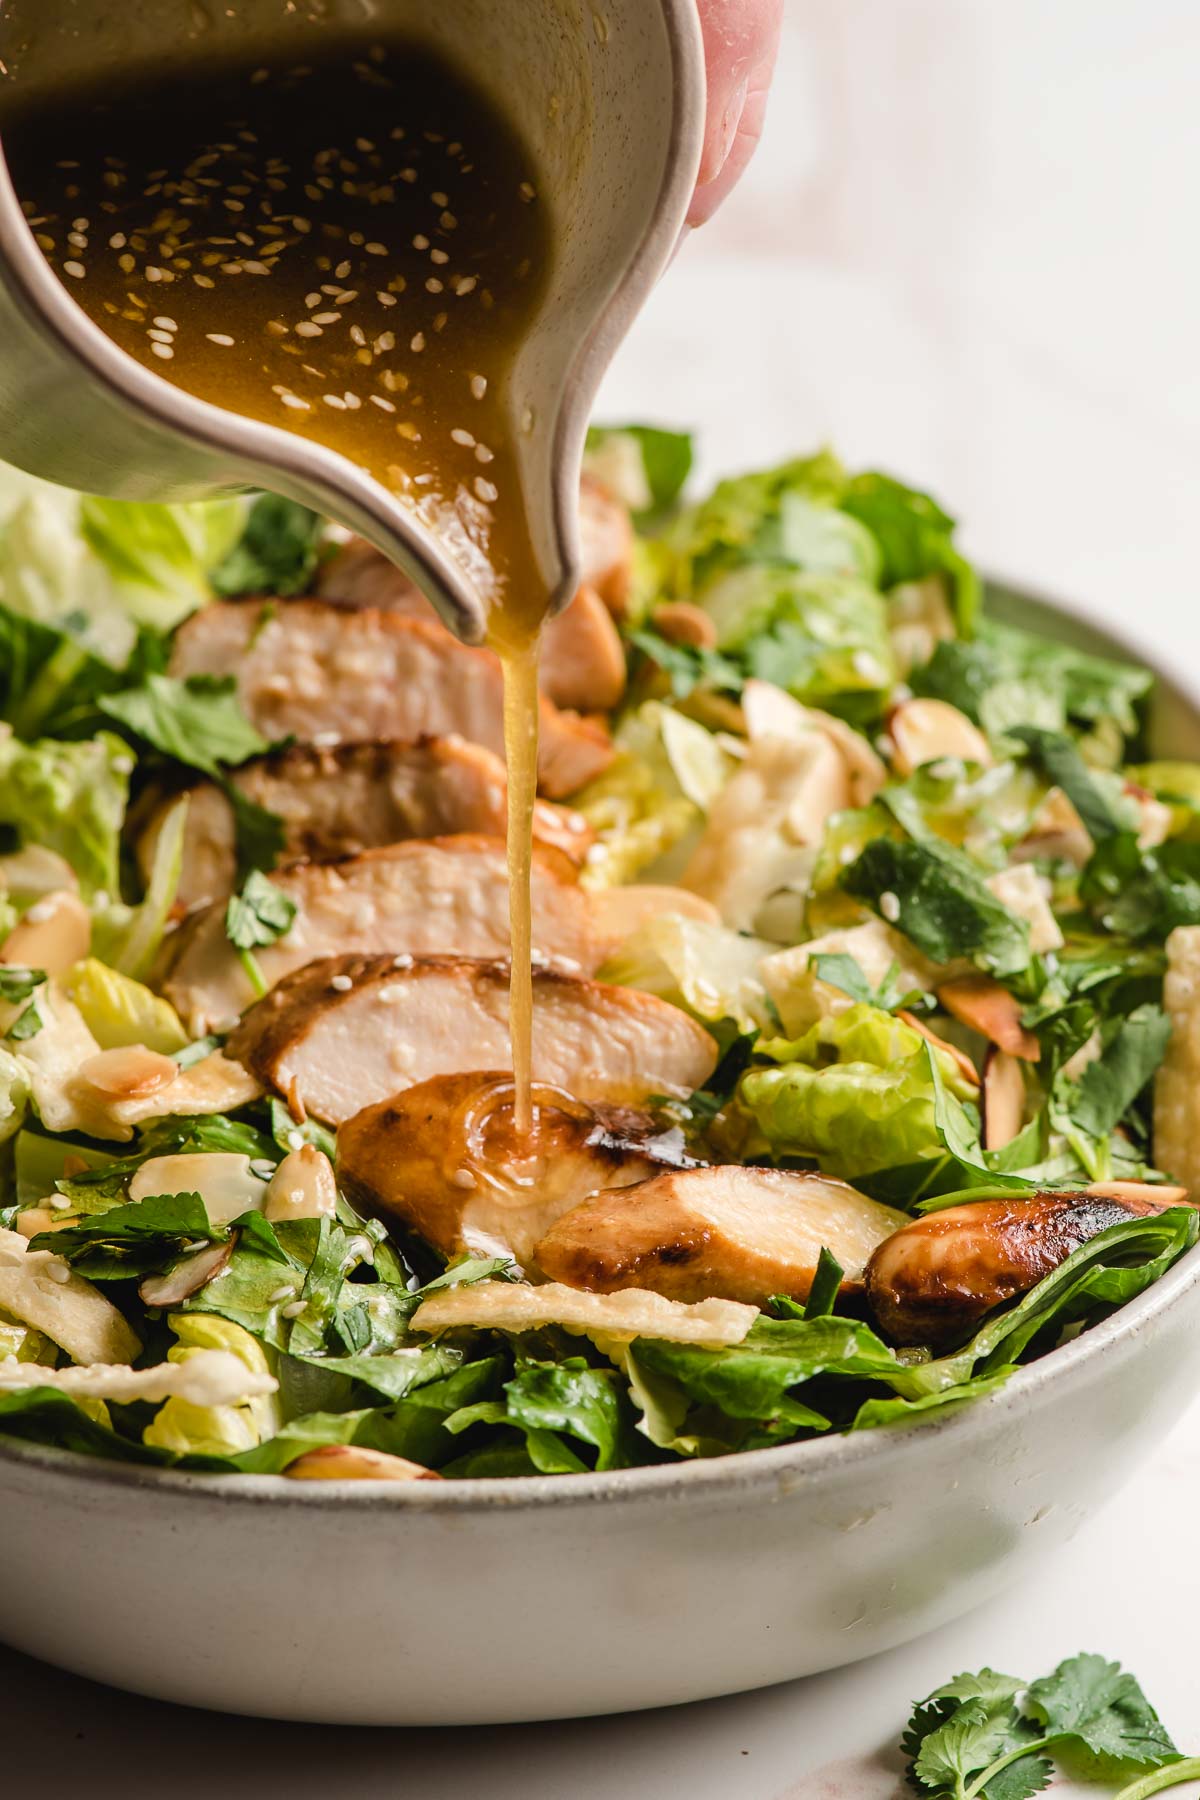 Asian sesame dressing being drizzled from a small pitcher onto a bowl of Asian chicken salad.